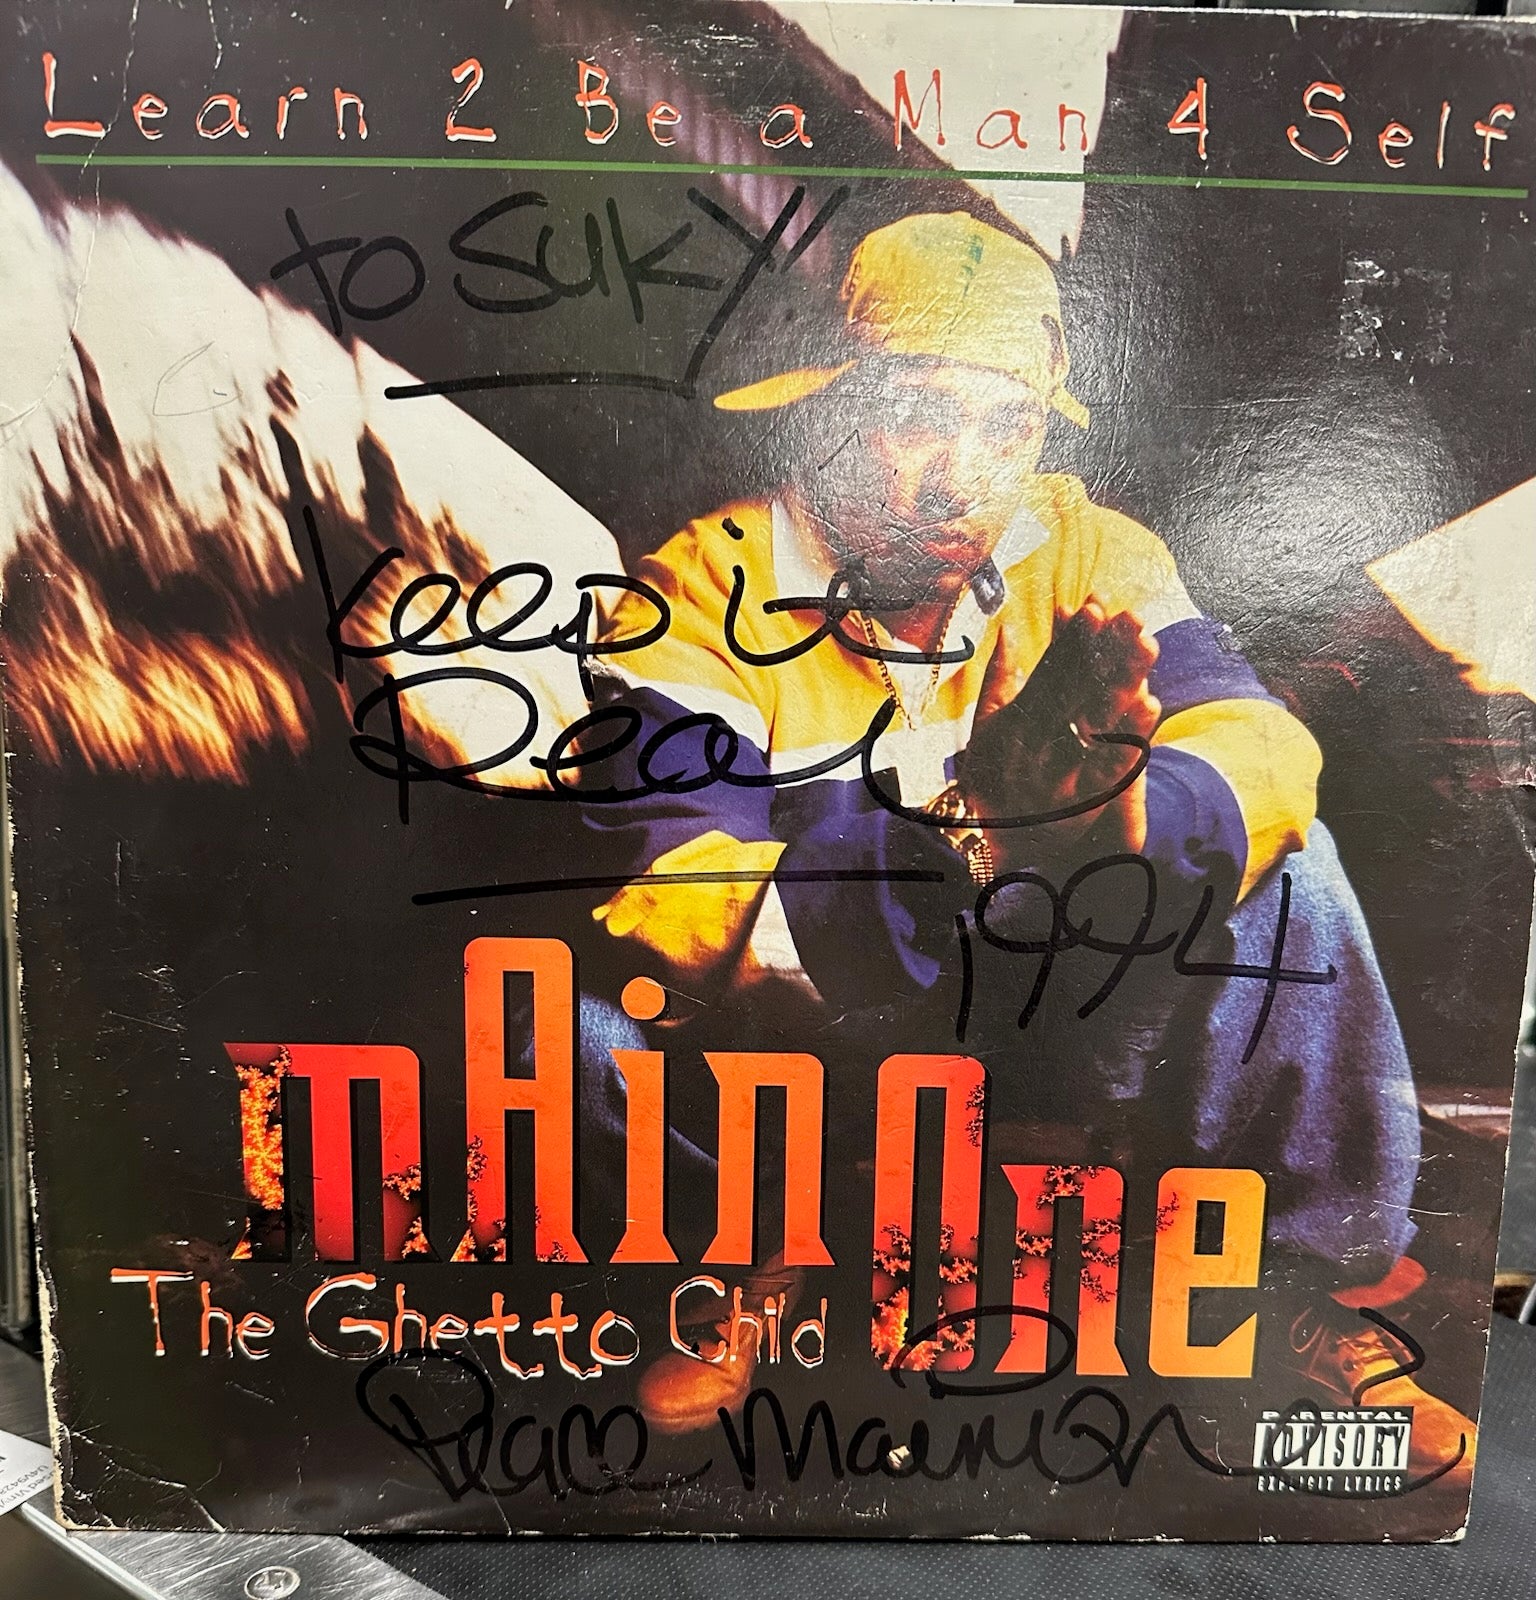 Main One The Ghetto Child- Learn 2 Be A Man 4 Self (12")(Signed By Artist On Cover, Cover Has Wear)